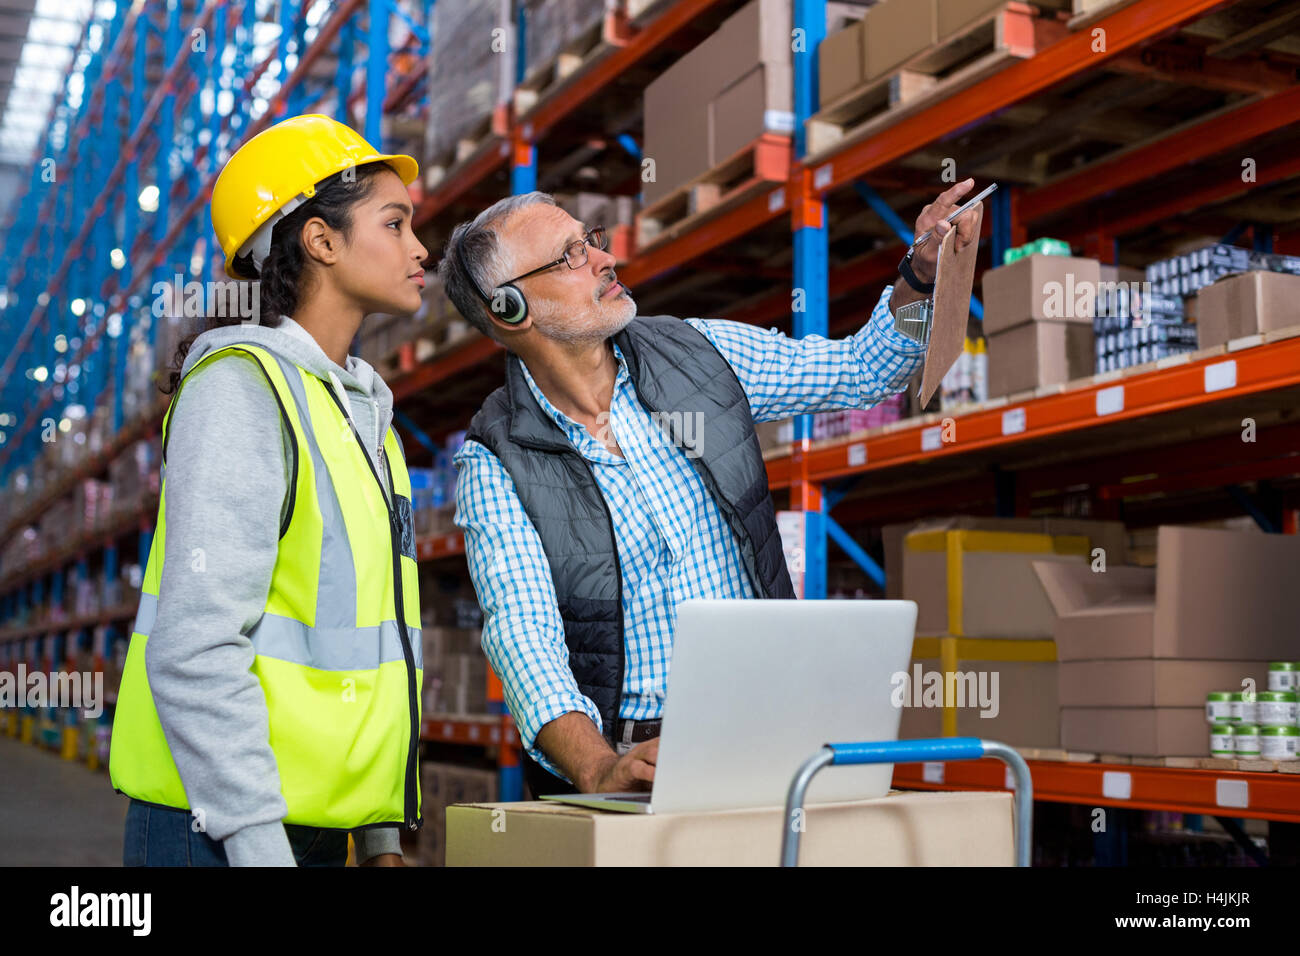 Warehouse manager and female worker interacting while using laptop Stock Photo